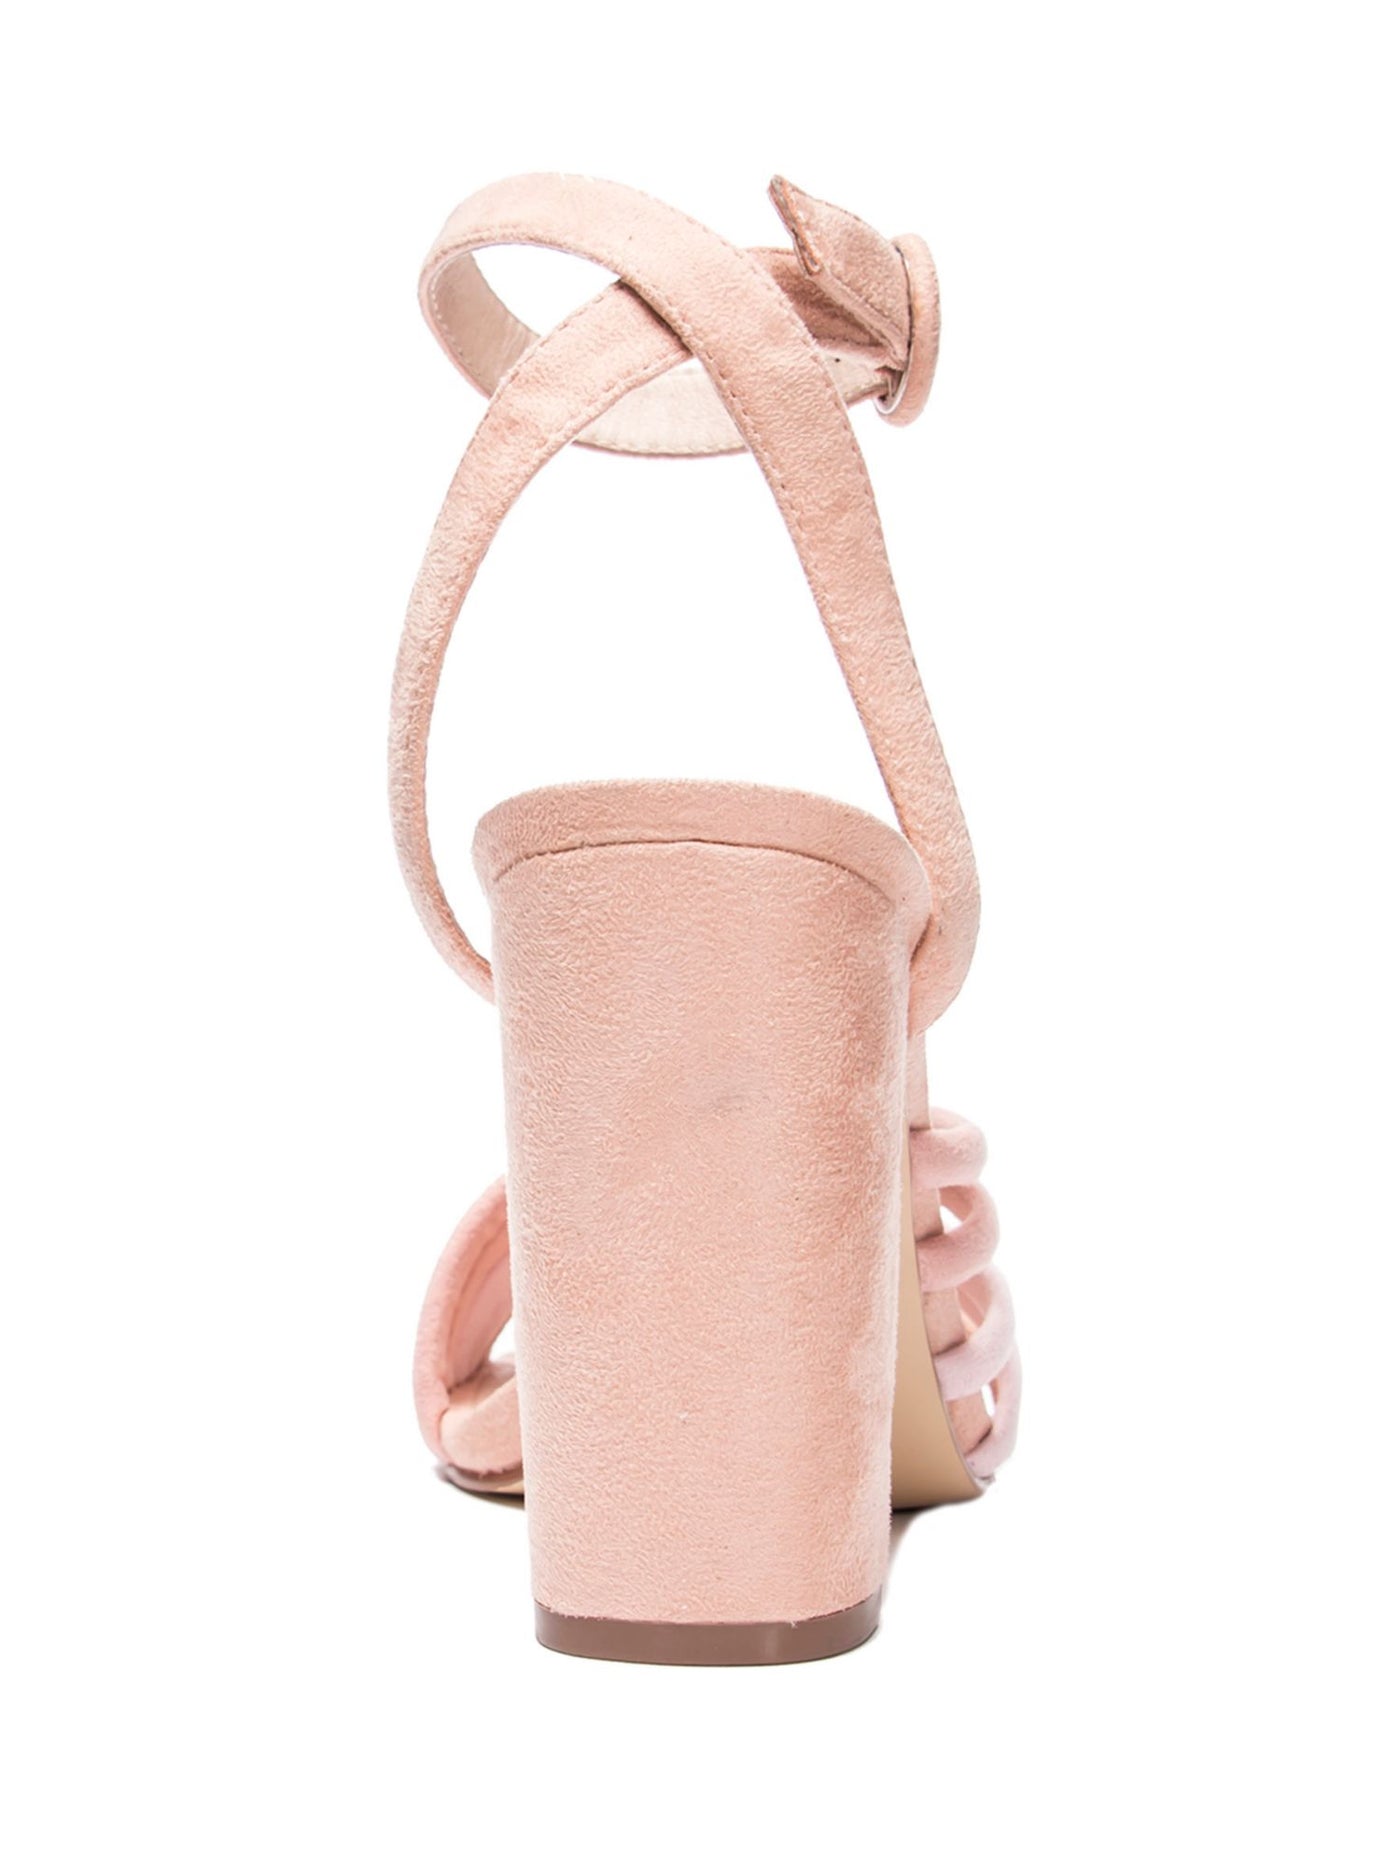 CHINESE LAUNDRY Womens Blush Pink Asymmetrical Strappy Jonah Square Toe Block Heel Buckle Dress Sandals Shoes 9.5